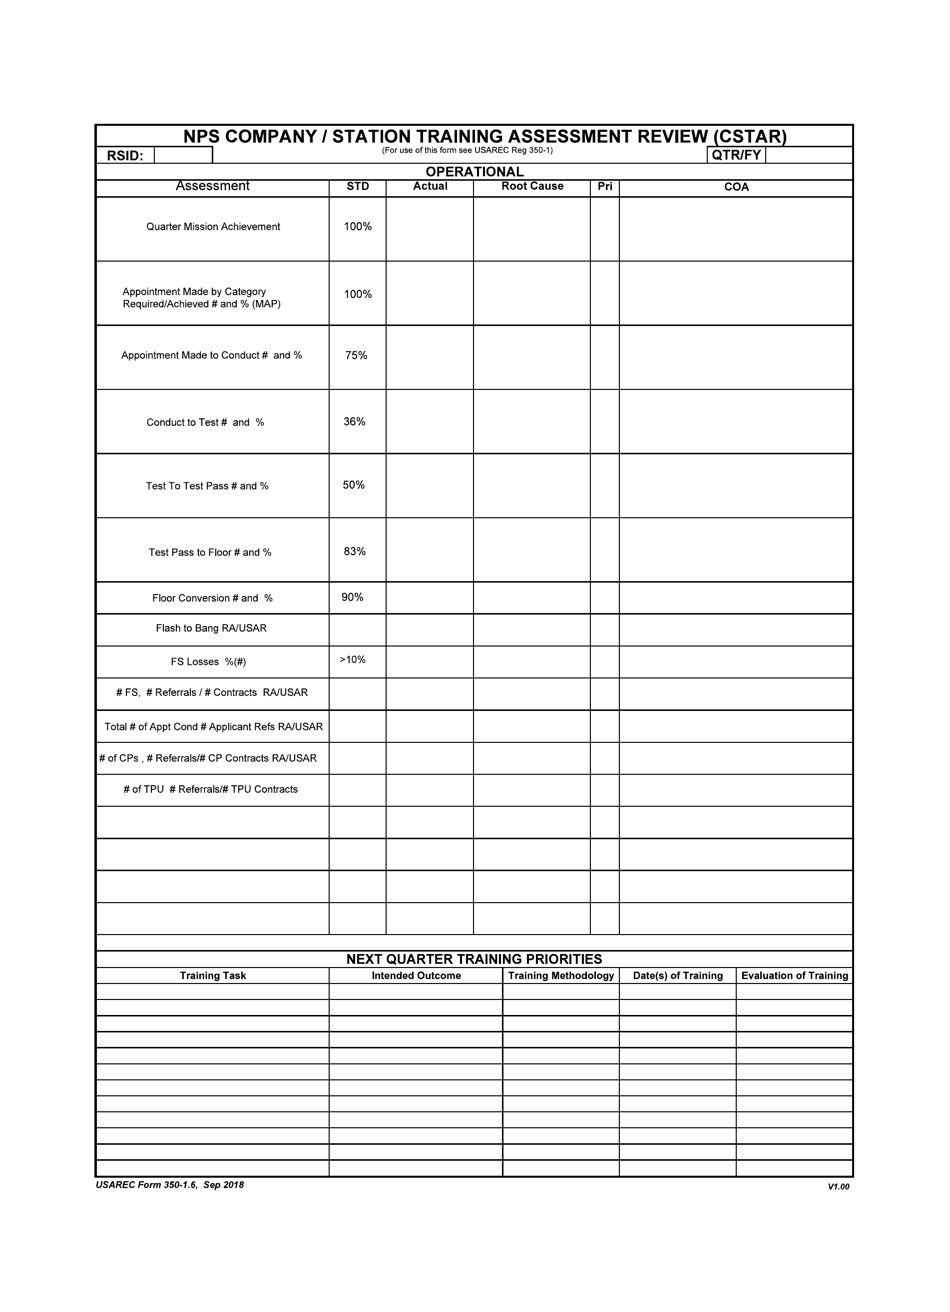 USAREC Form 350-1.6 Nps Company / Station Training Assessment Review (Cstar), Page 1